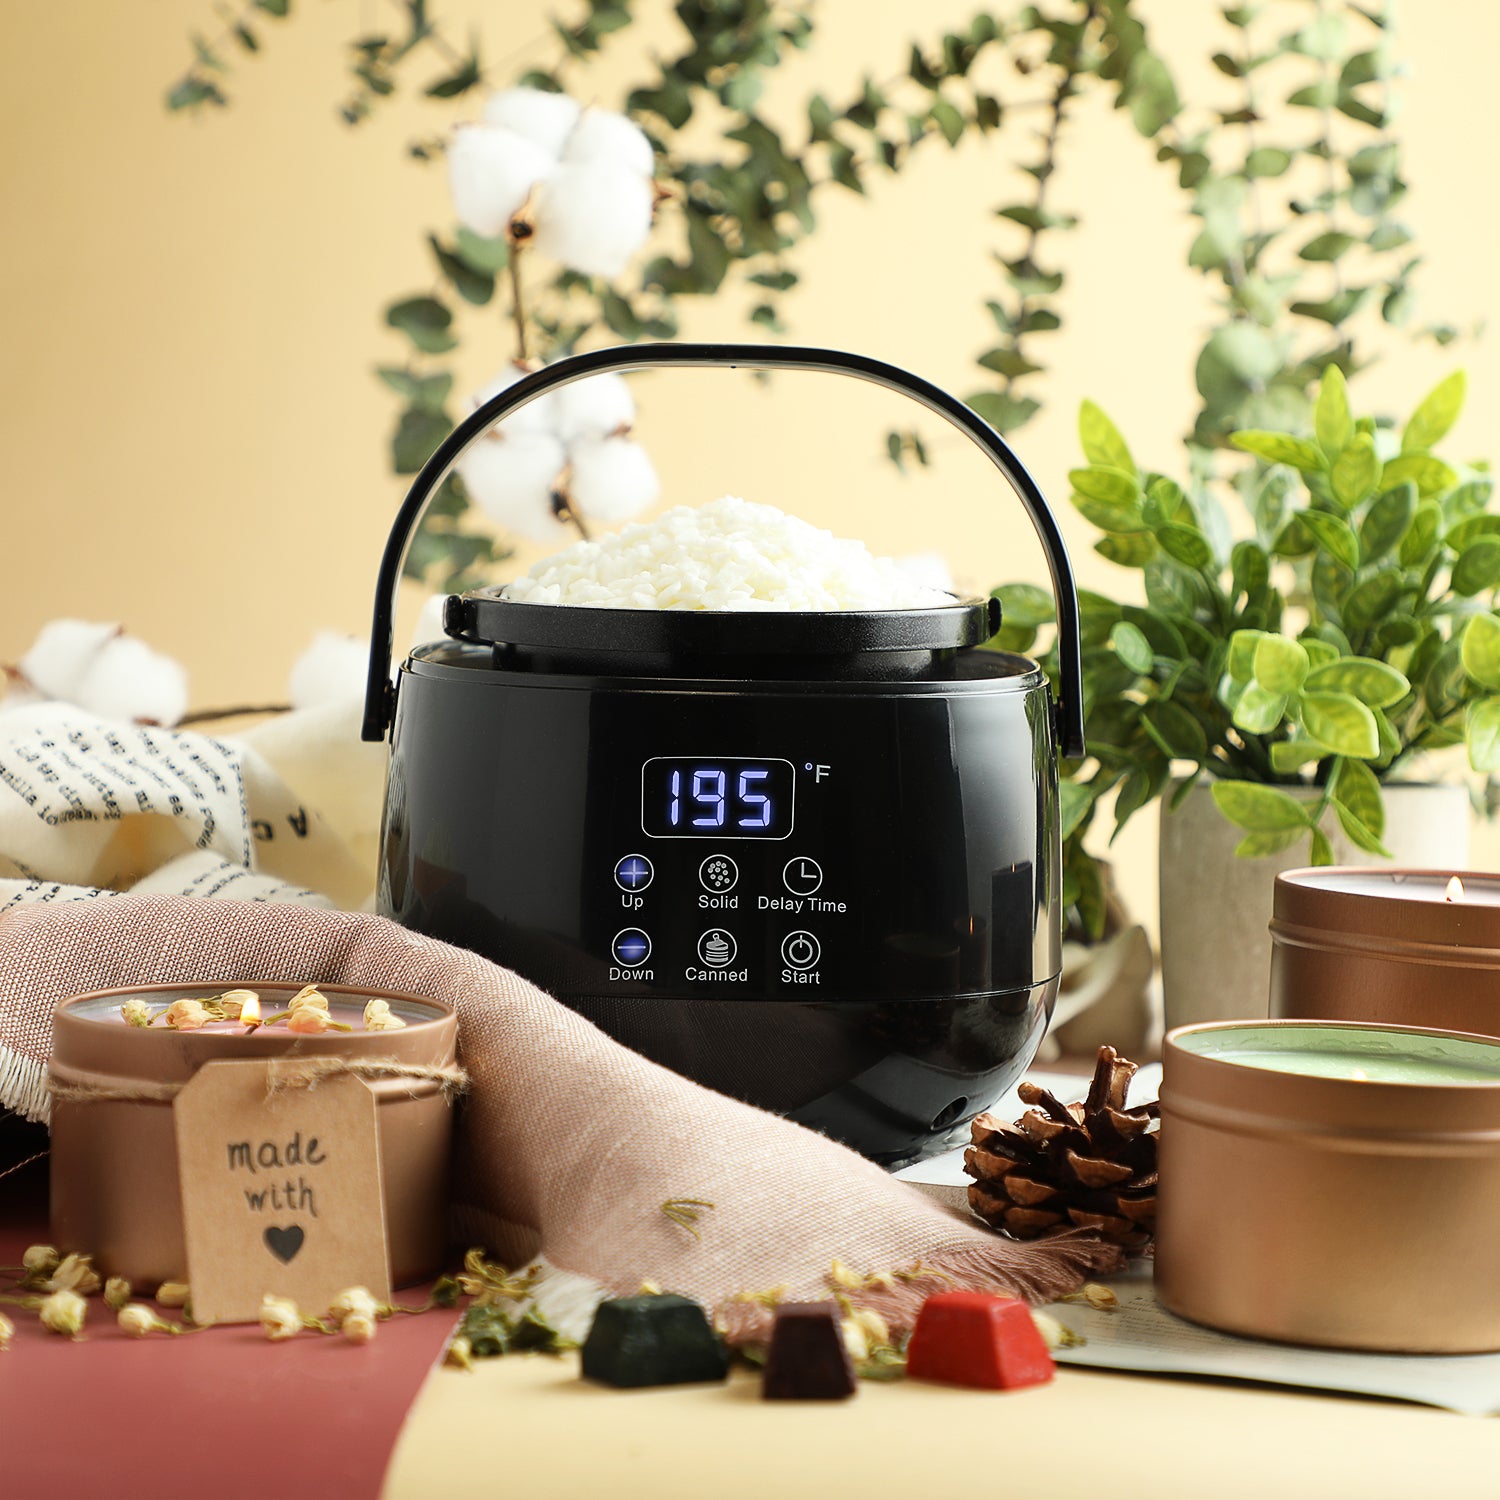 10 LB Wax Melter for Candle Making: Wax Capacity Electric Wax Pot